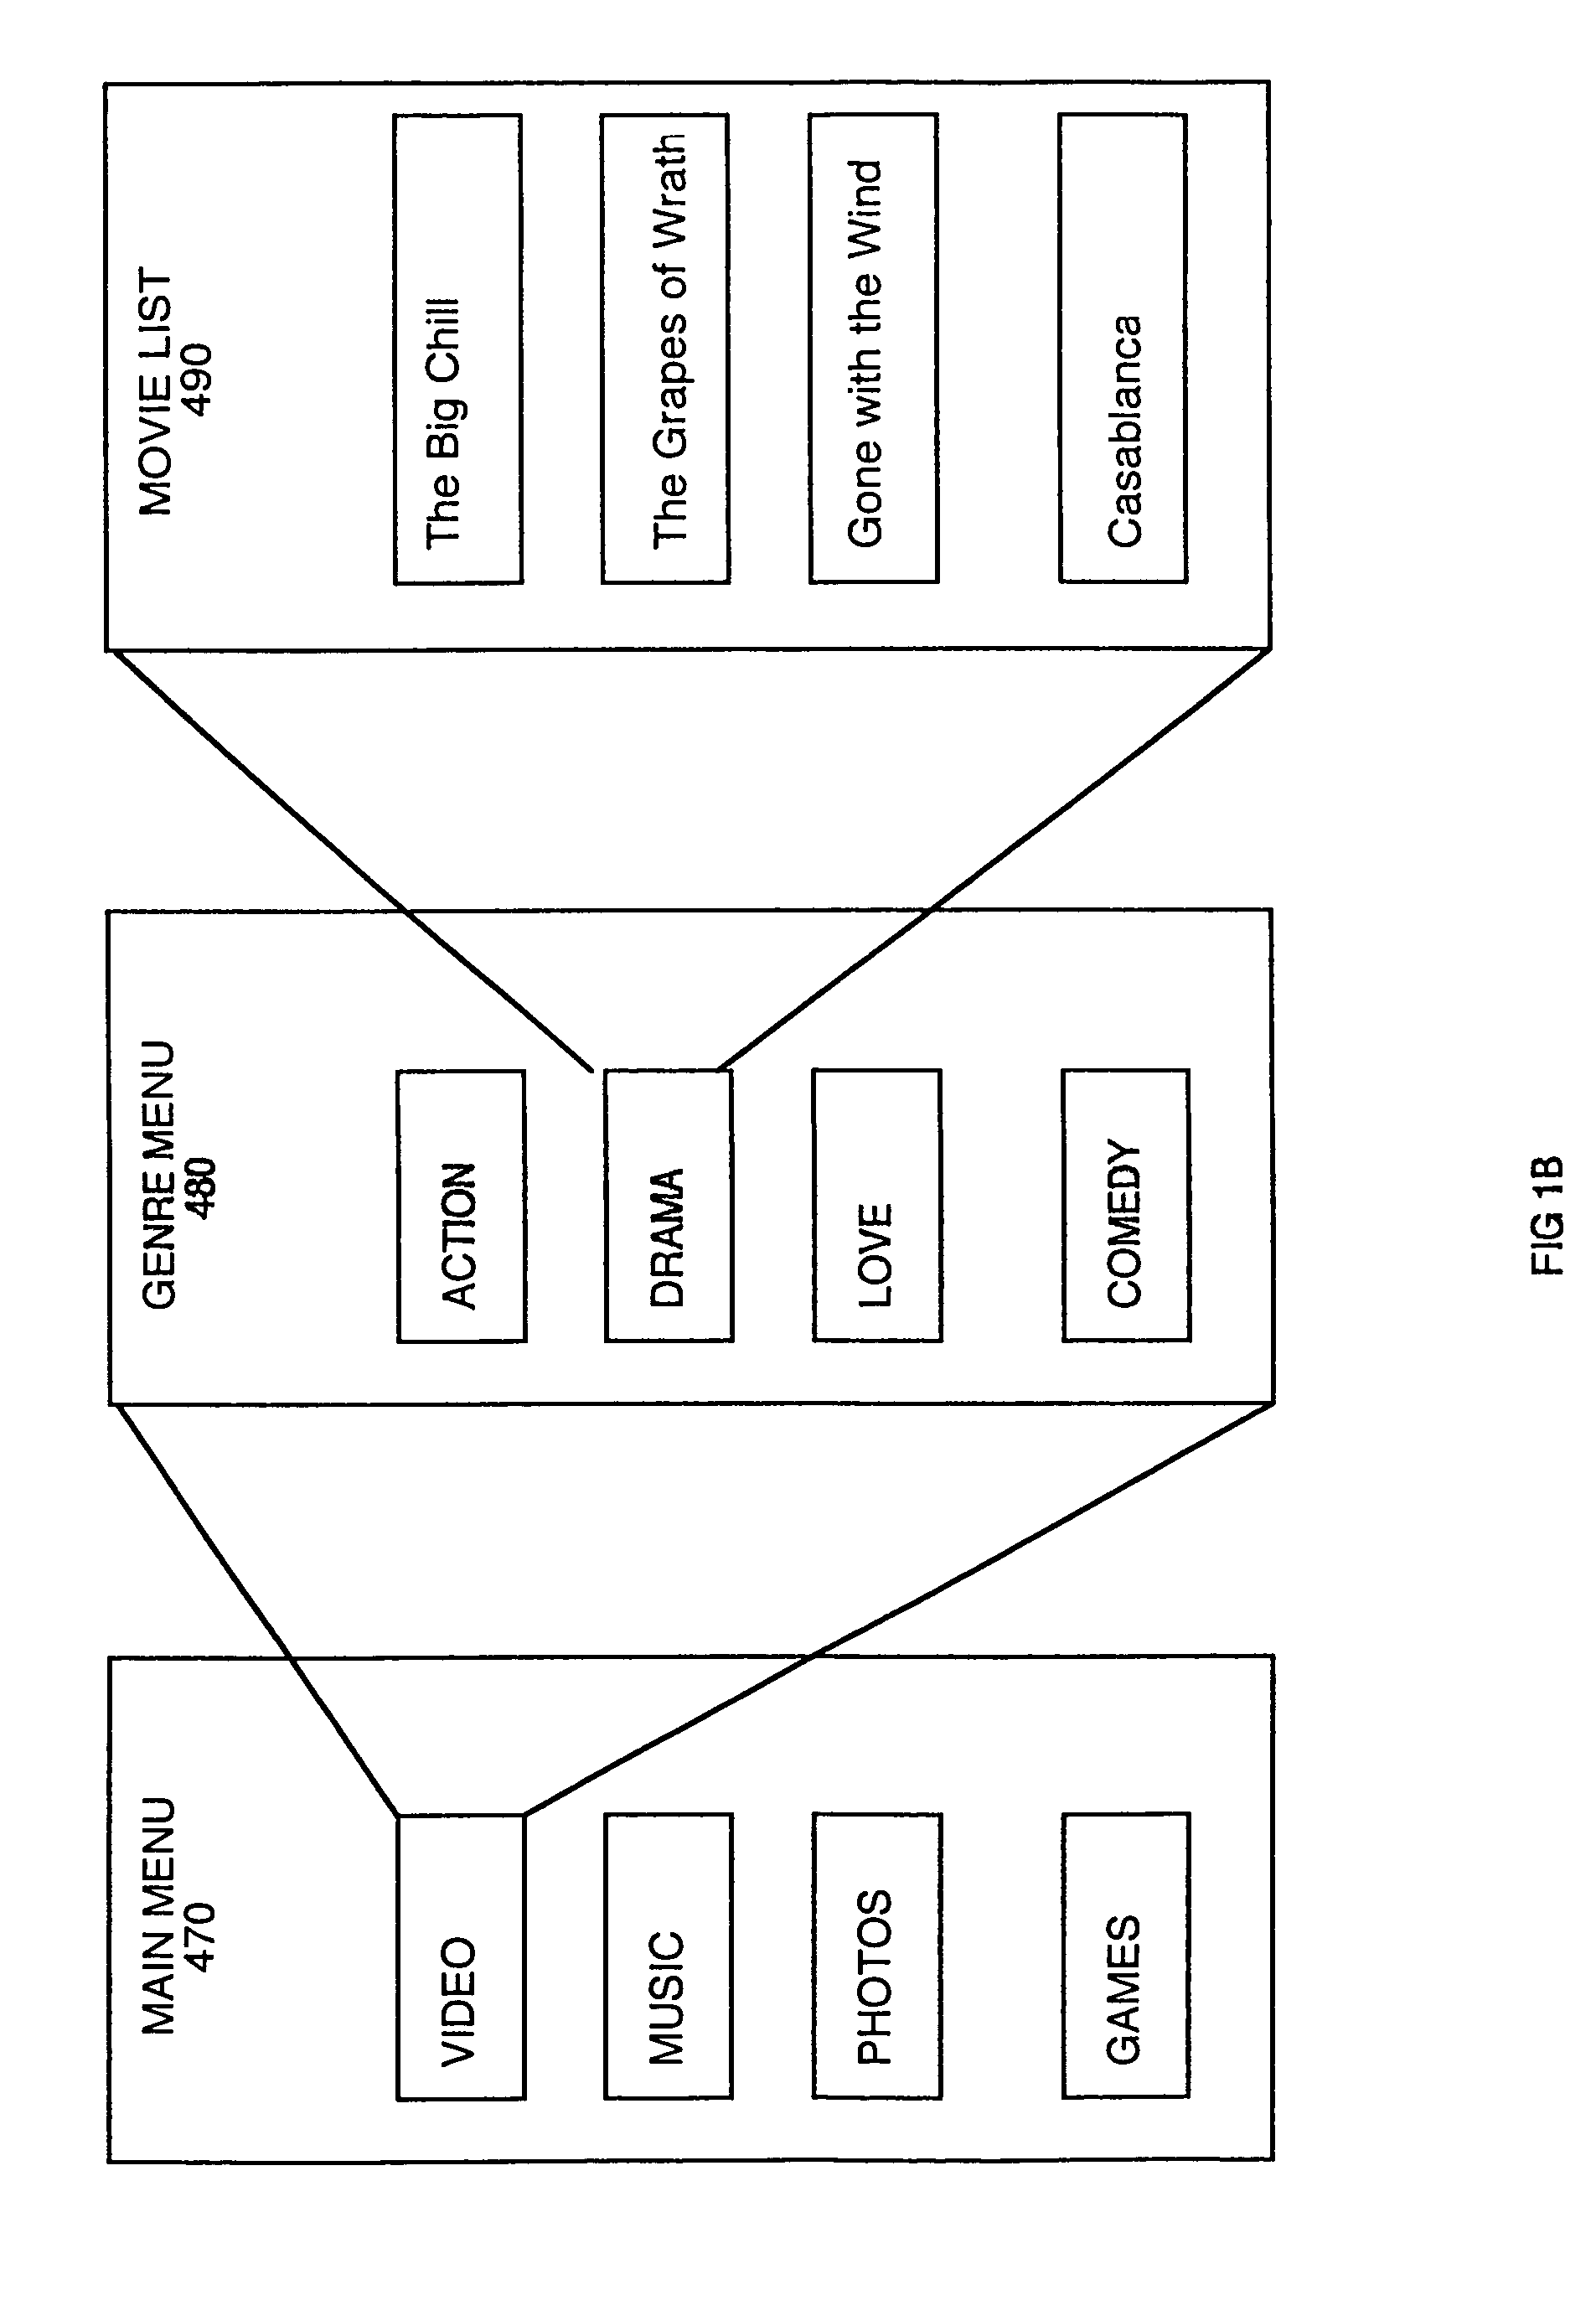 Secure content enabled drive digital rights management system and method